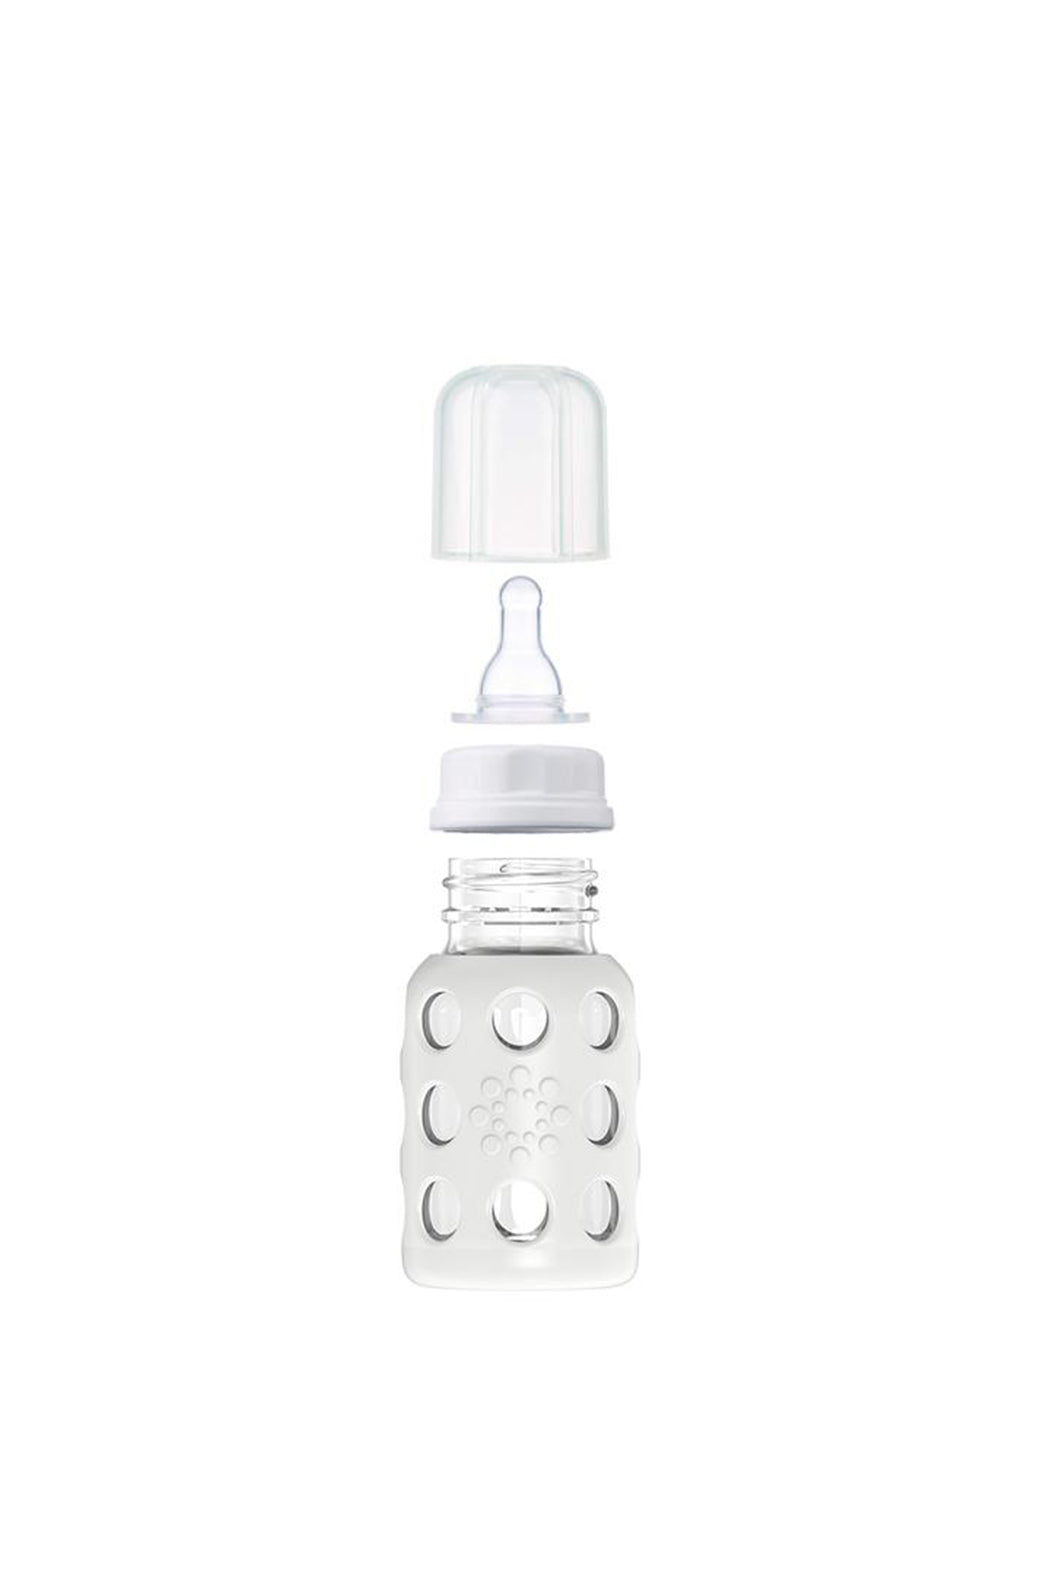 Lifefactory 4oz Glass Baby Bottle With Silicone Sleeve